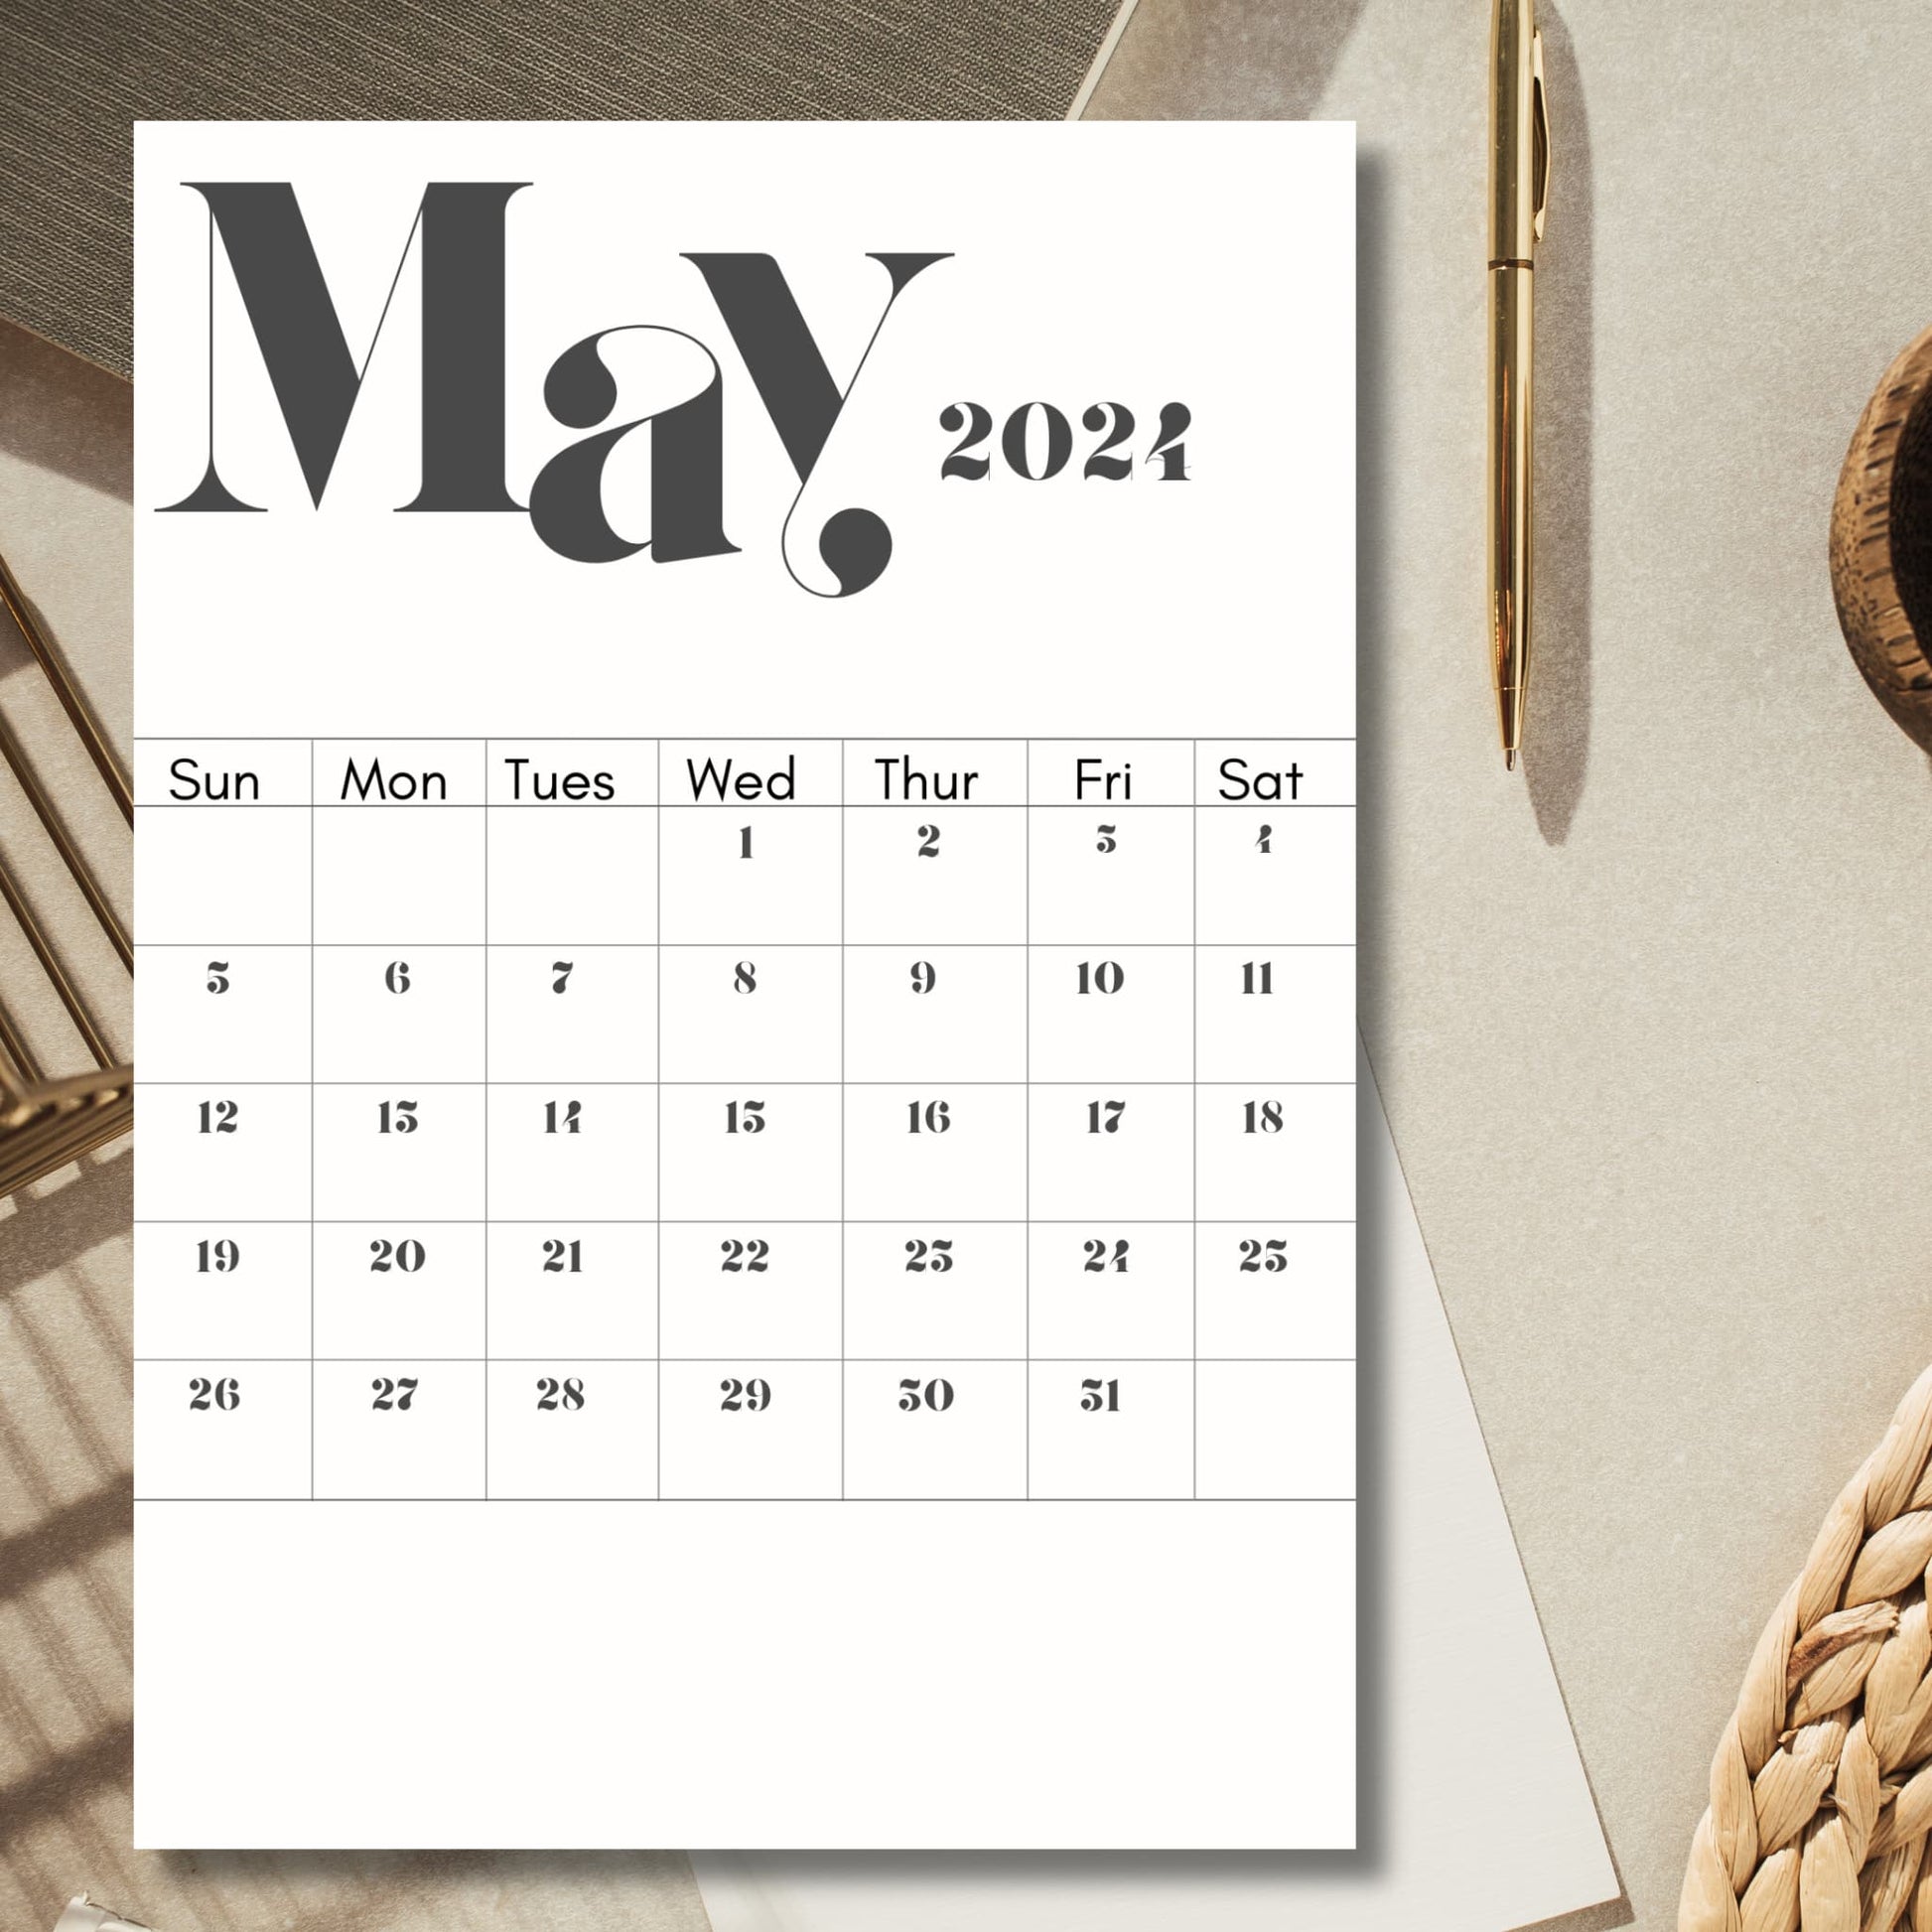 2024 May calendar page print on a table with pen and laptop.